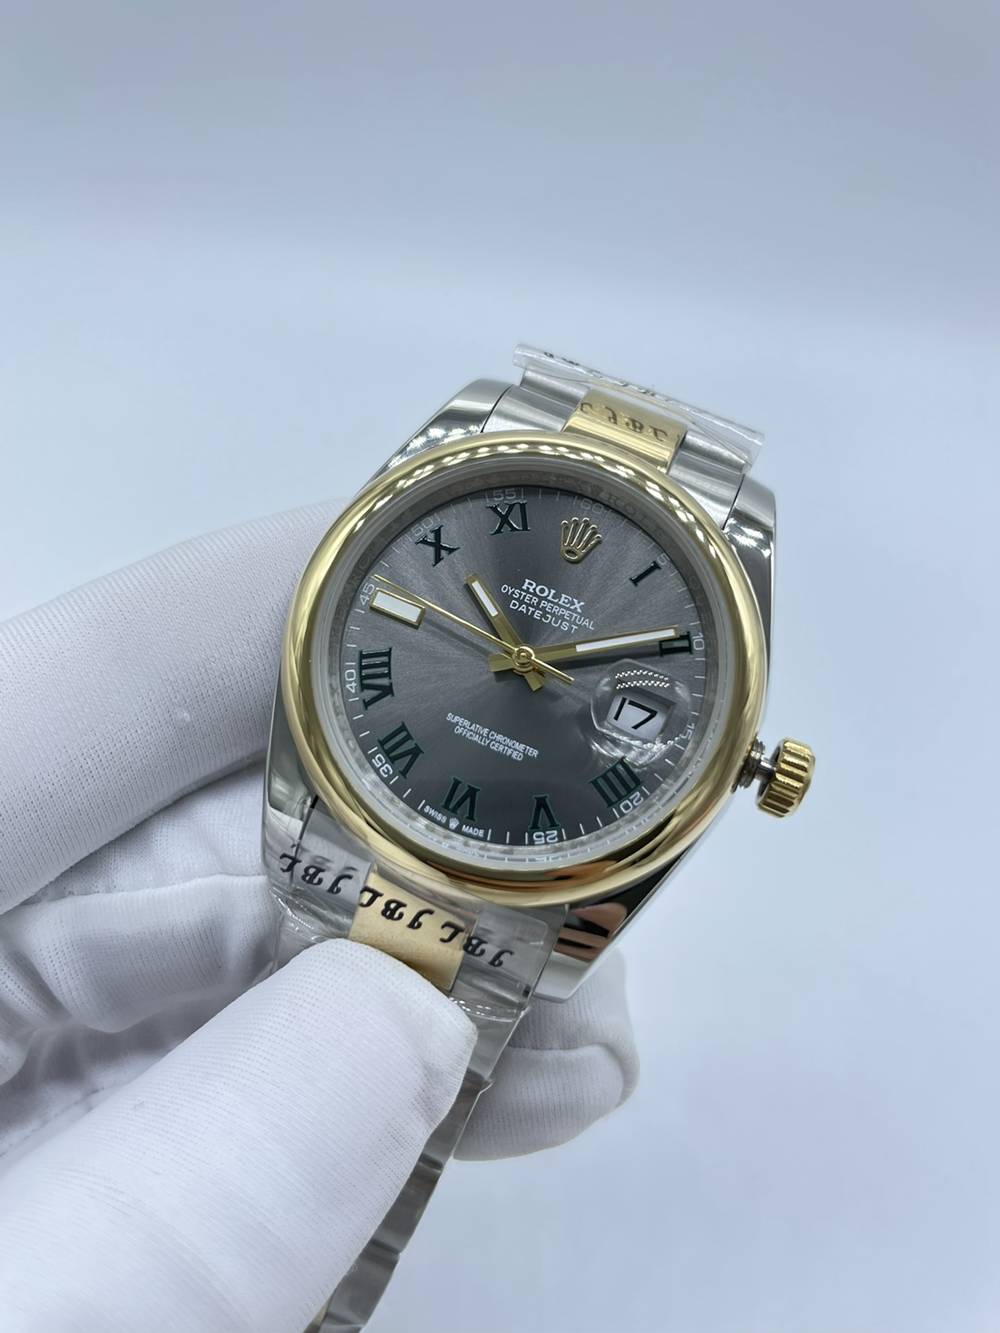 Datejust 2tone gold 36mm gray dial green Roman numbers oyster band AAA automatic S